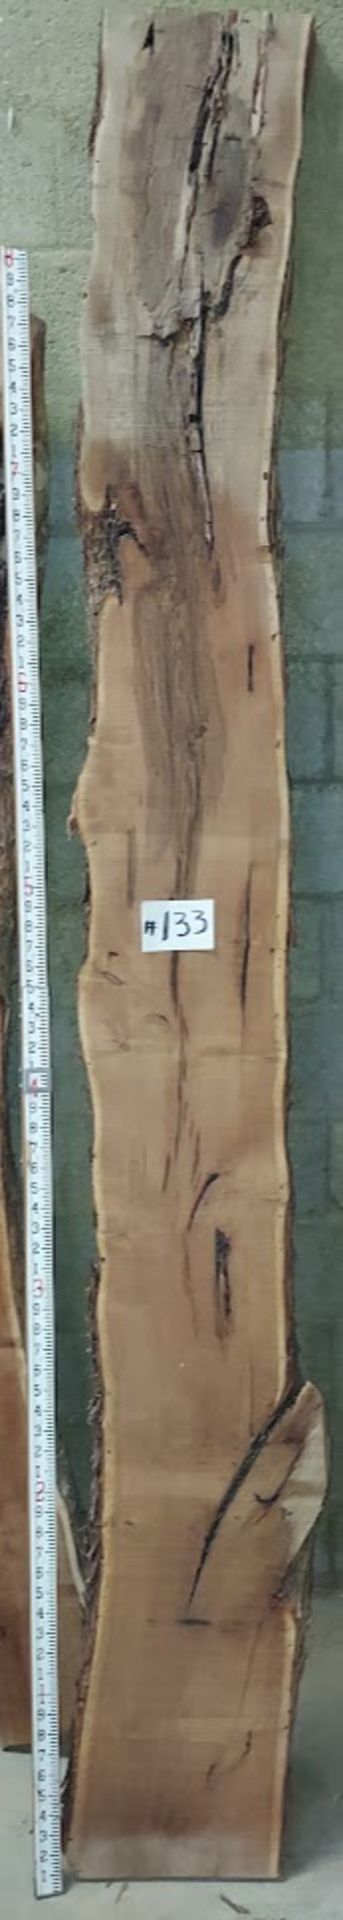 Mesquite Hardwood Lumber Slab, Size is approx. 108" x 11" - 12-1/2" x 2-1/4" Thick (Book Matched